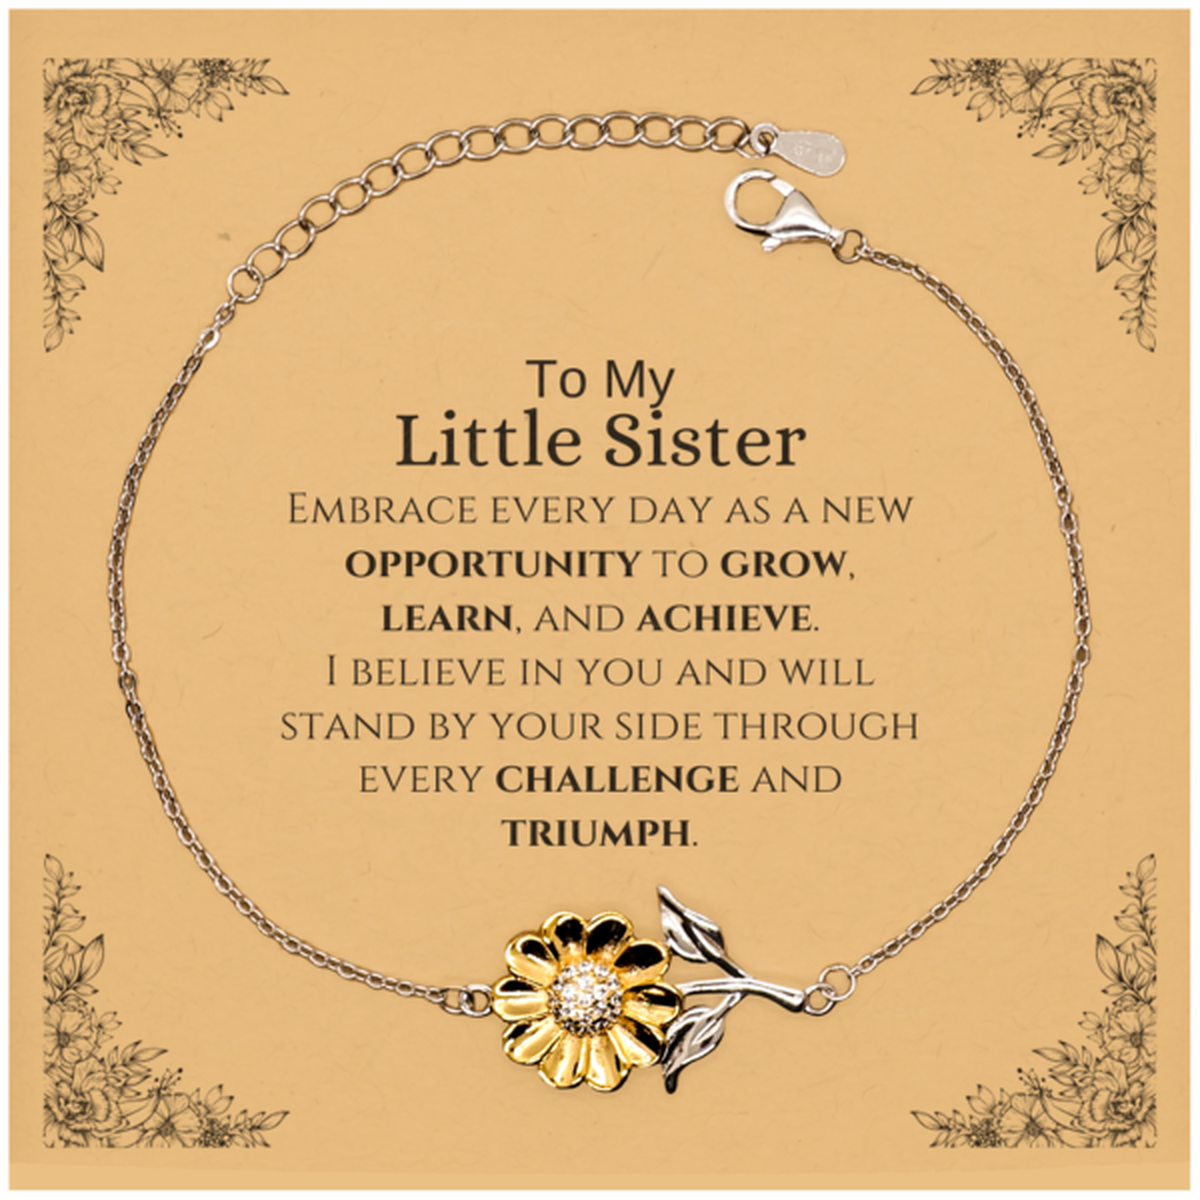 To My Little Sister Gifts, I believe in you and will stand by your side, Inspirational Sunflower Bracelet For Little Sister, Birthday Christmas Motivational Little Sister Gifts